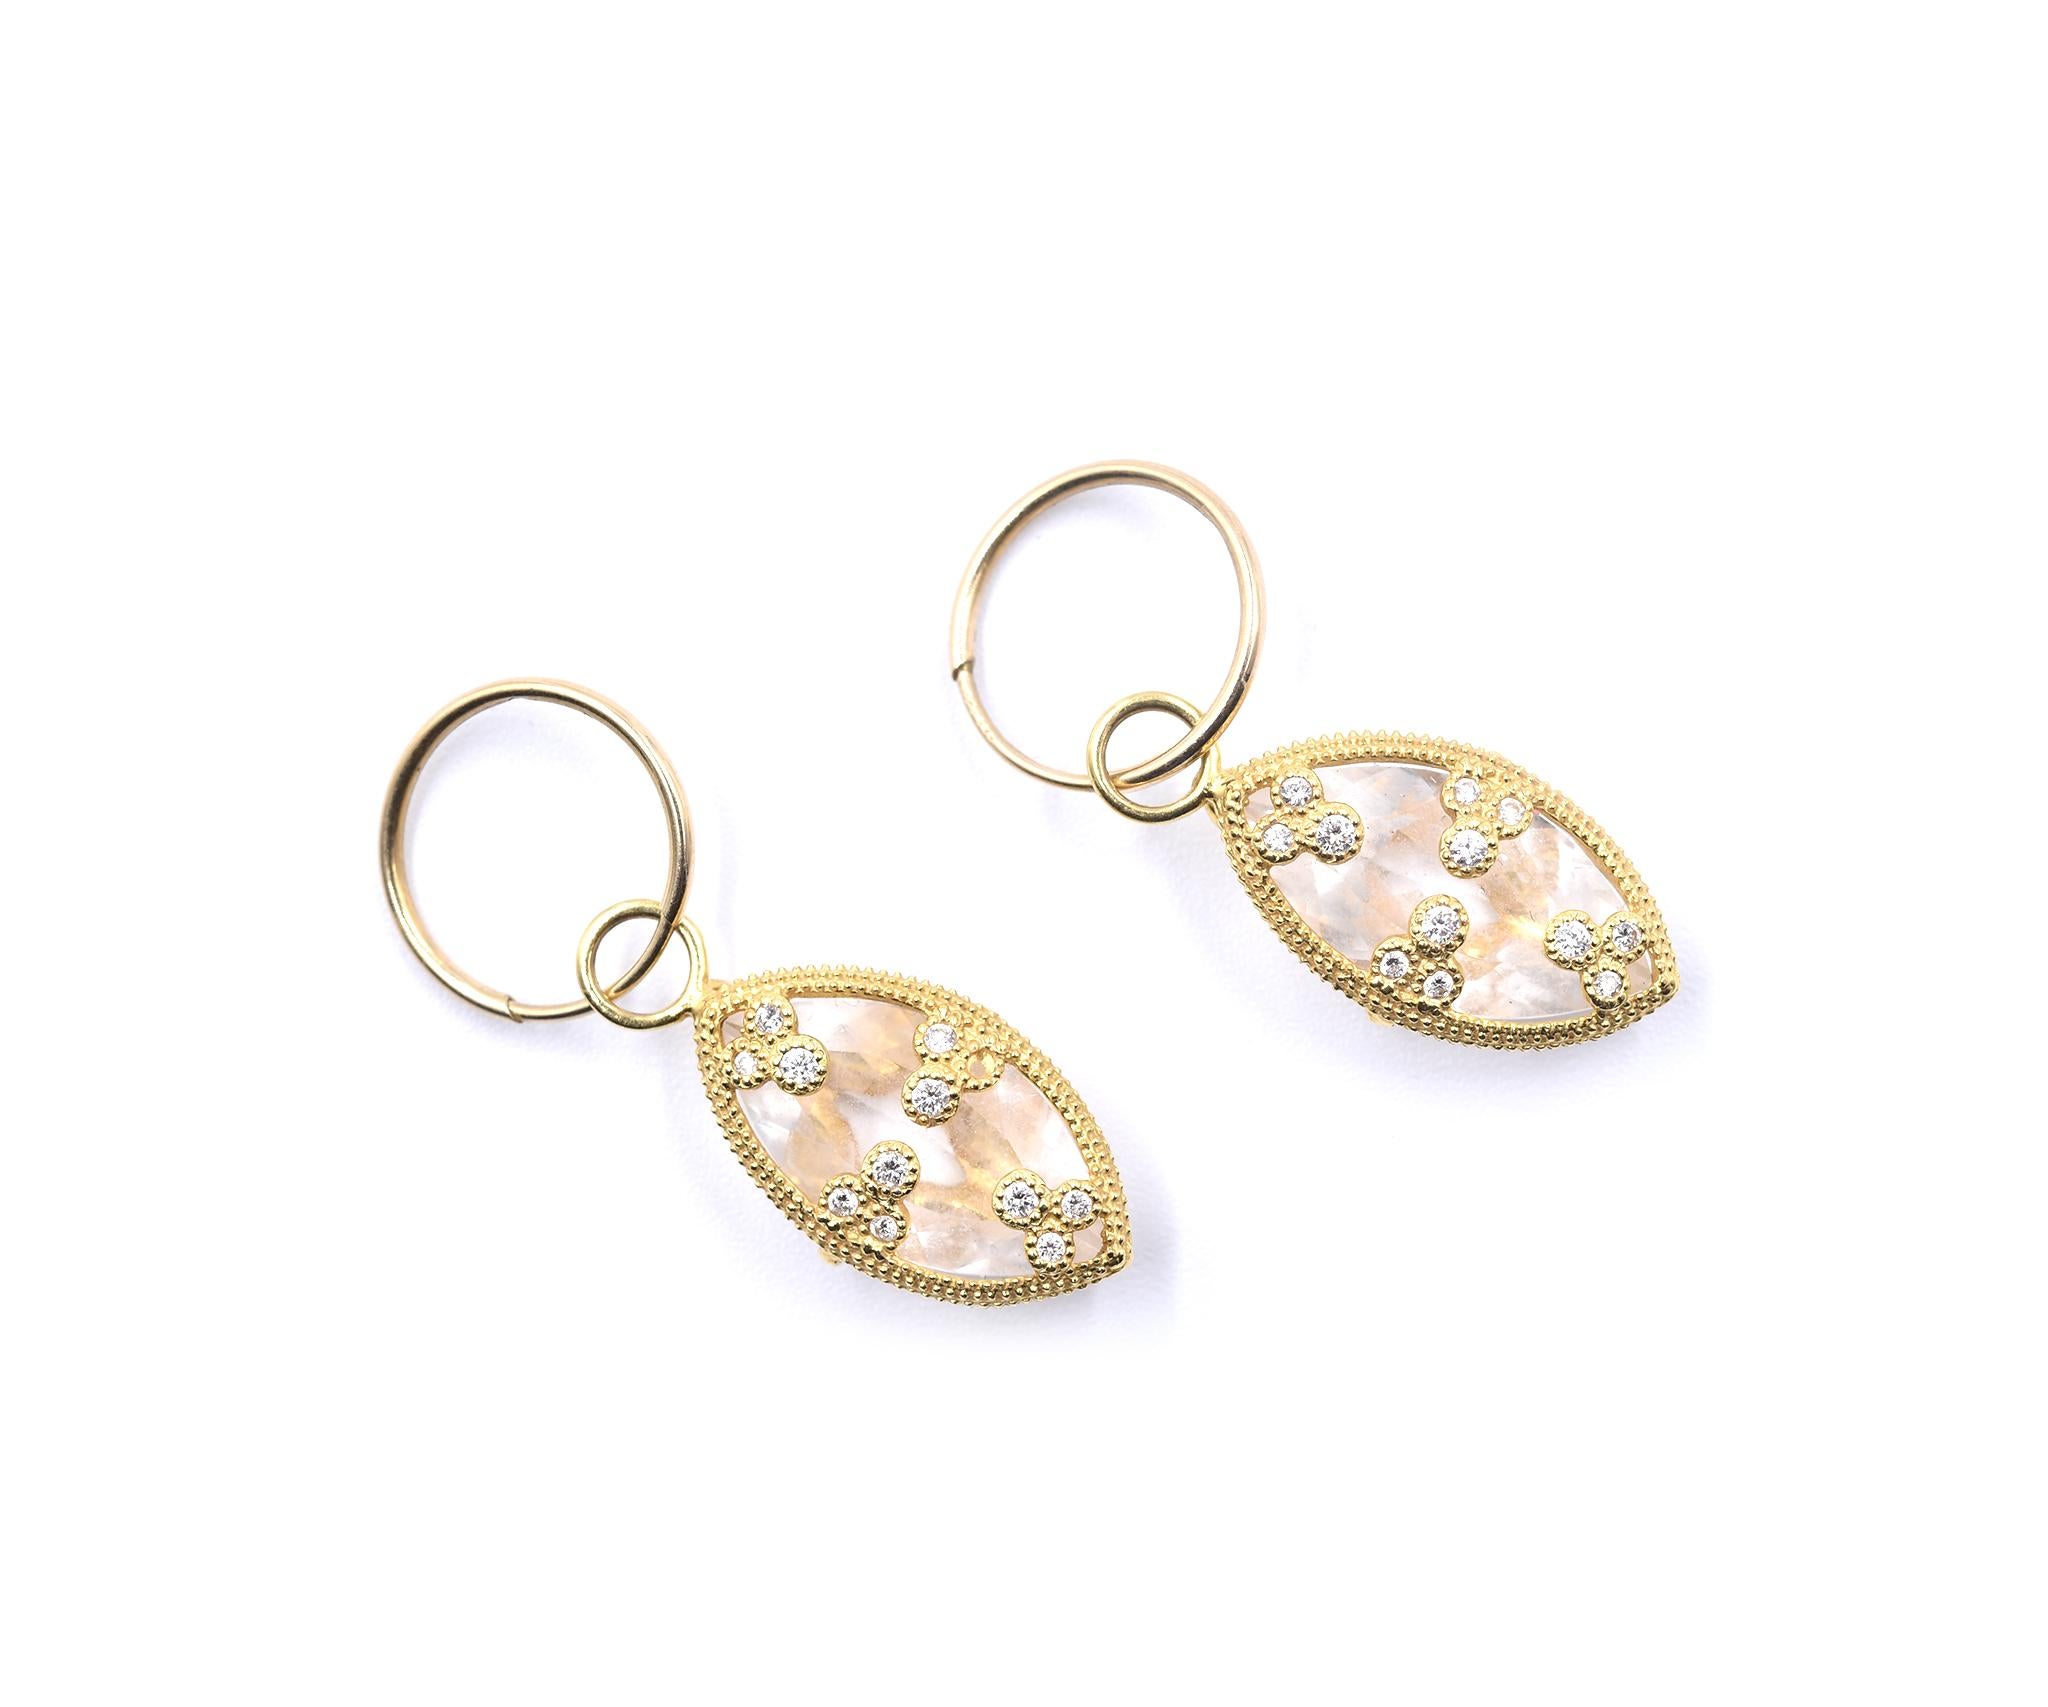 Designer: Jude Frances
Material: 18k yellow gold
Diamonds: 24 round brilliant cuts = 0.25cttw
Color: G
Clarity: VS
Dimensions: earrings are 32.90mm by 10.50mm 
Fastenings: endless hoops
Weight: 4.68 grams
